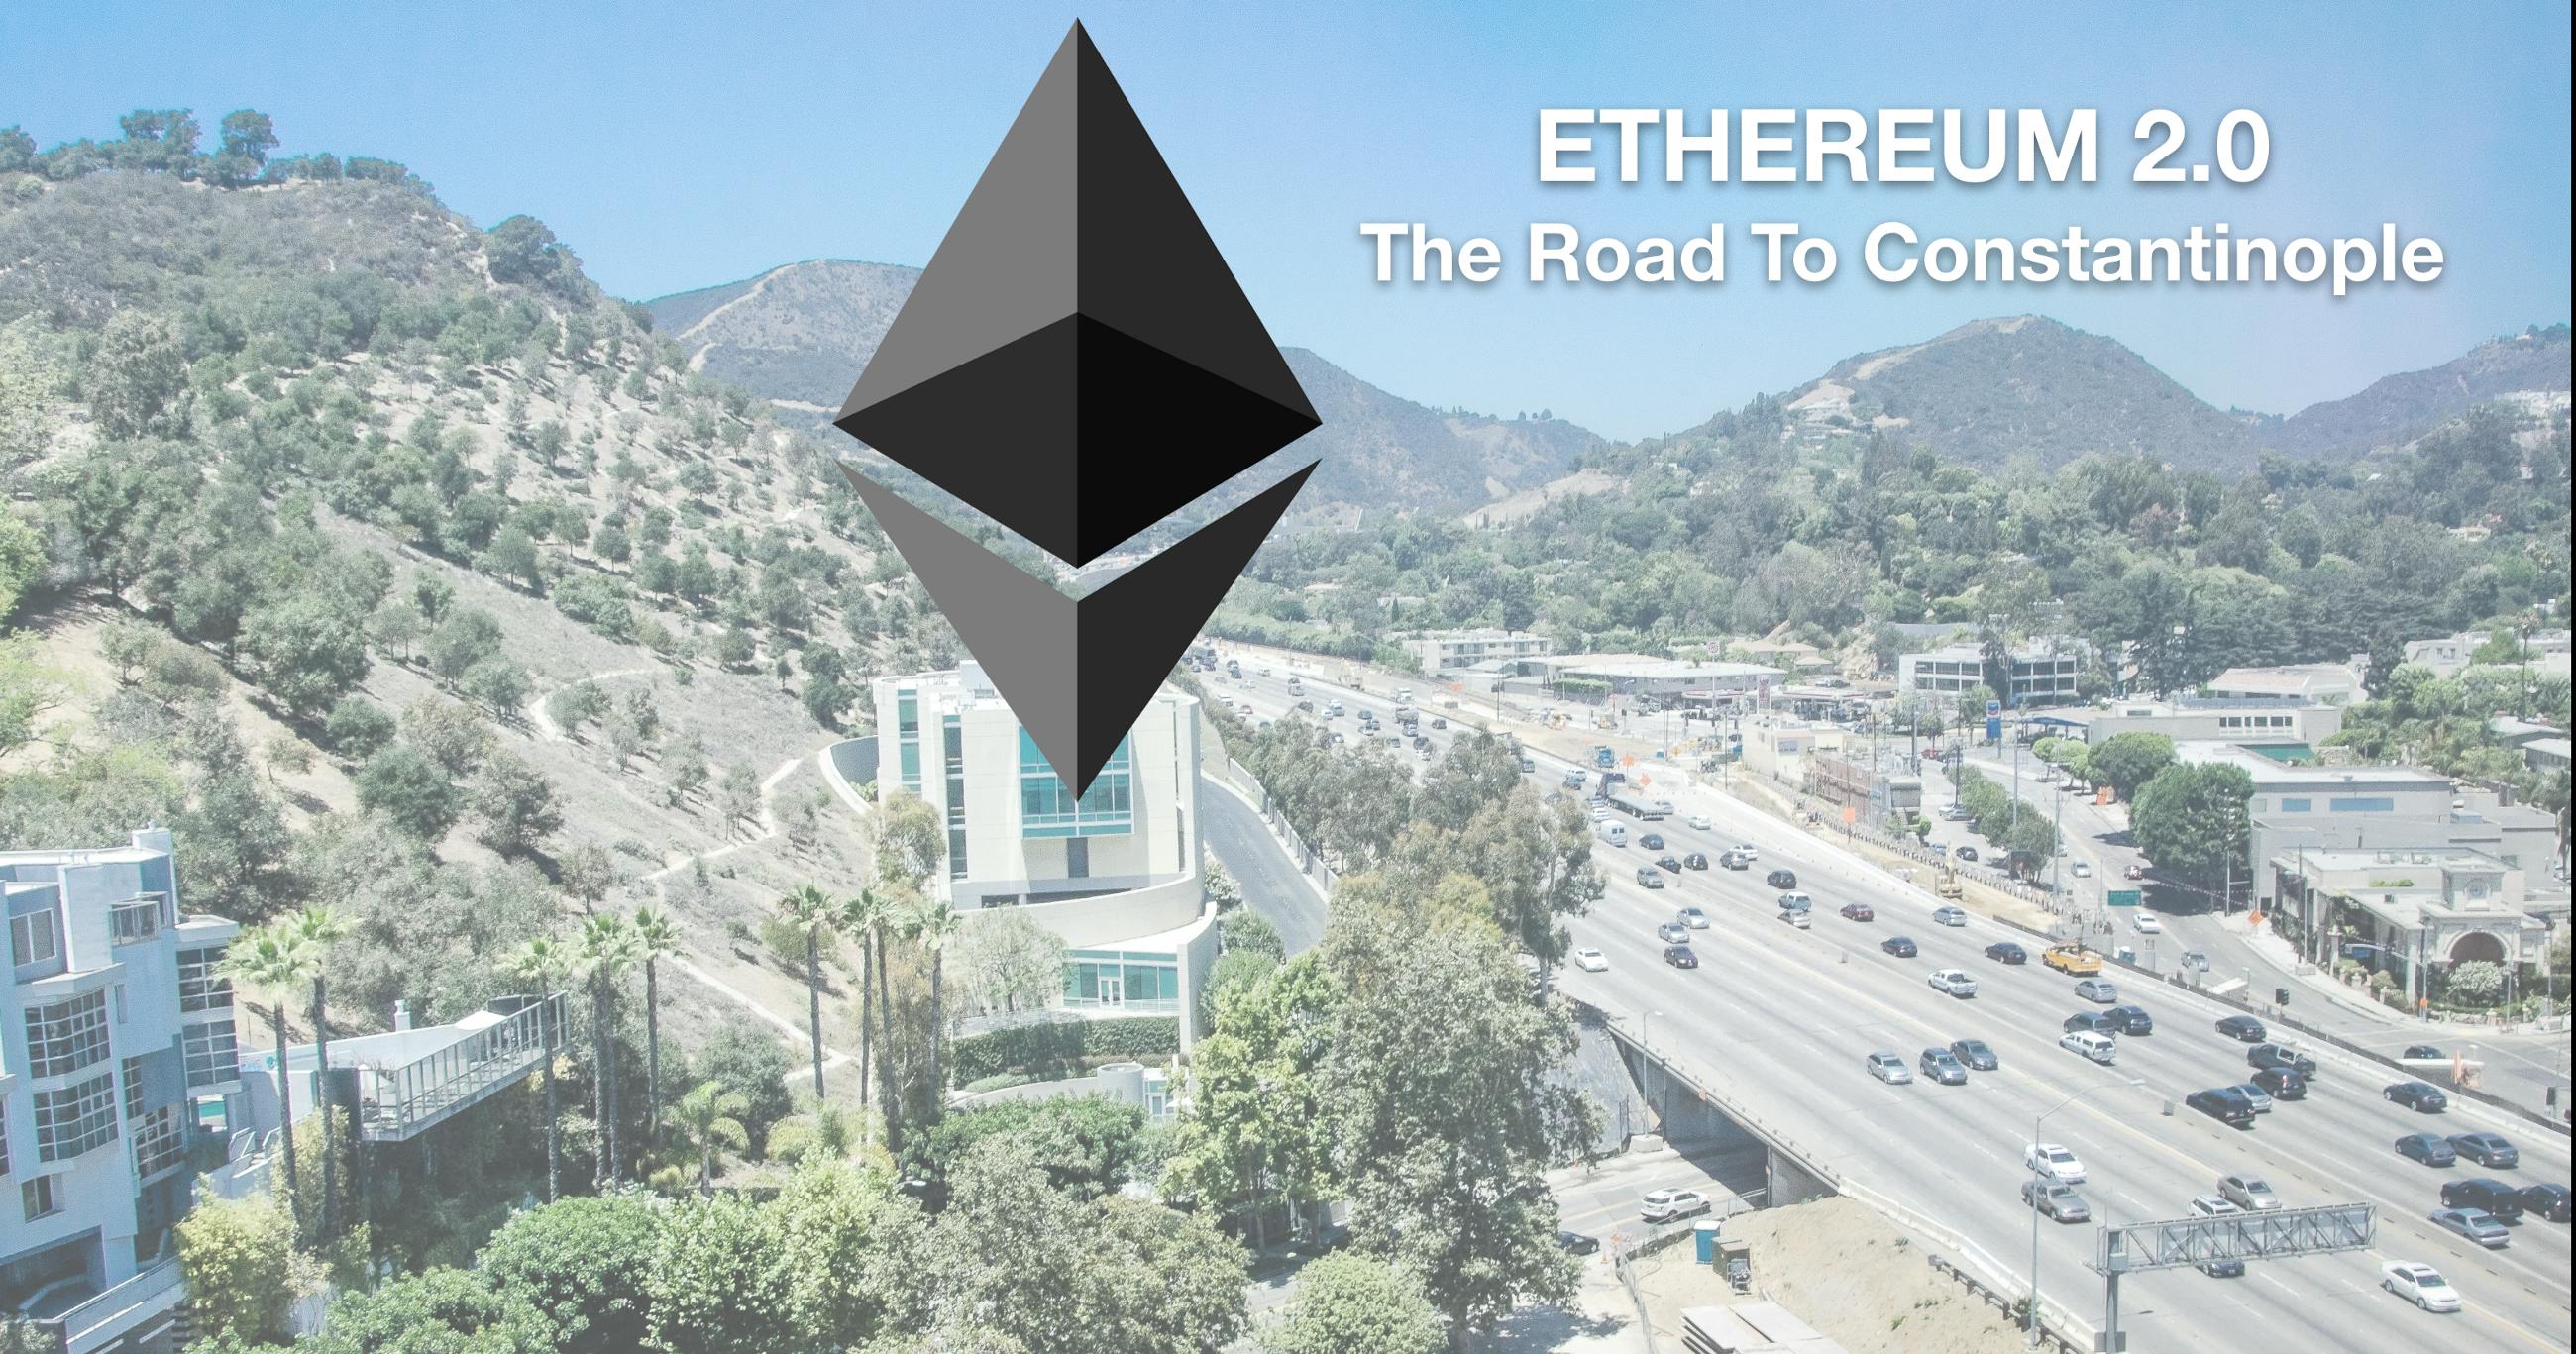 /ethereum-2-0-the-road-to-constantinople-and-beyond-44f8876ef748 feature image